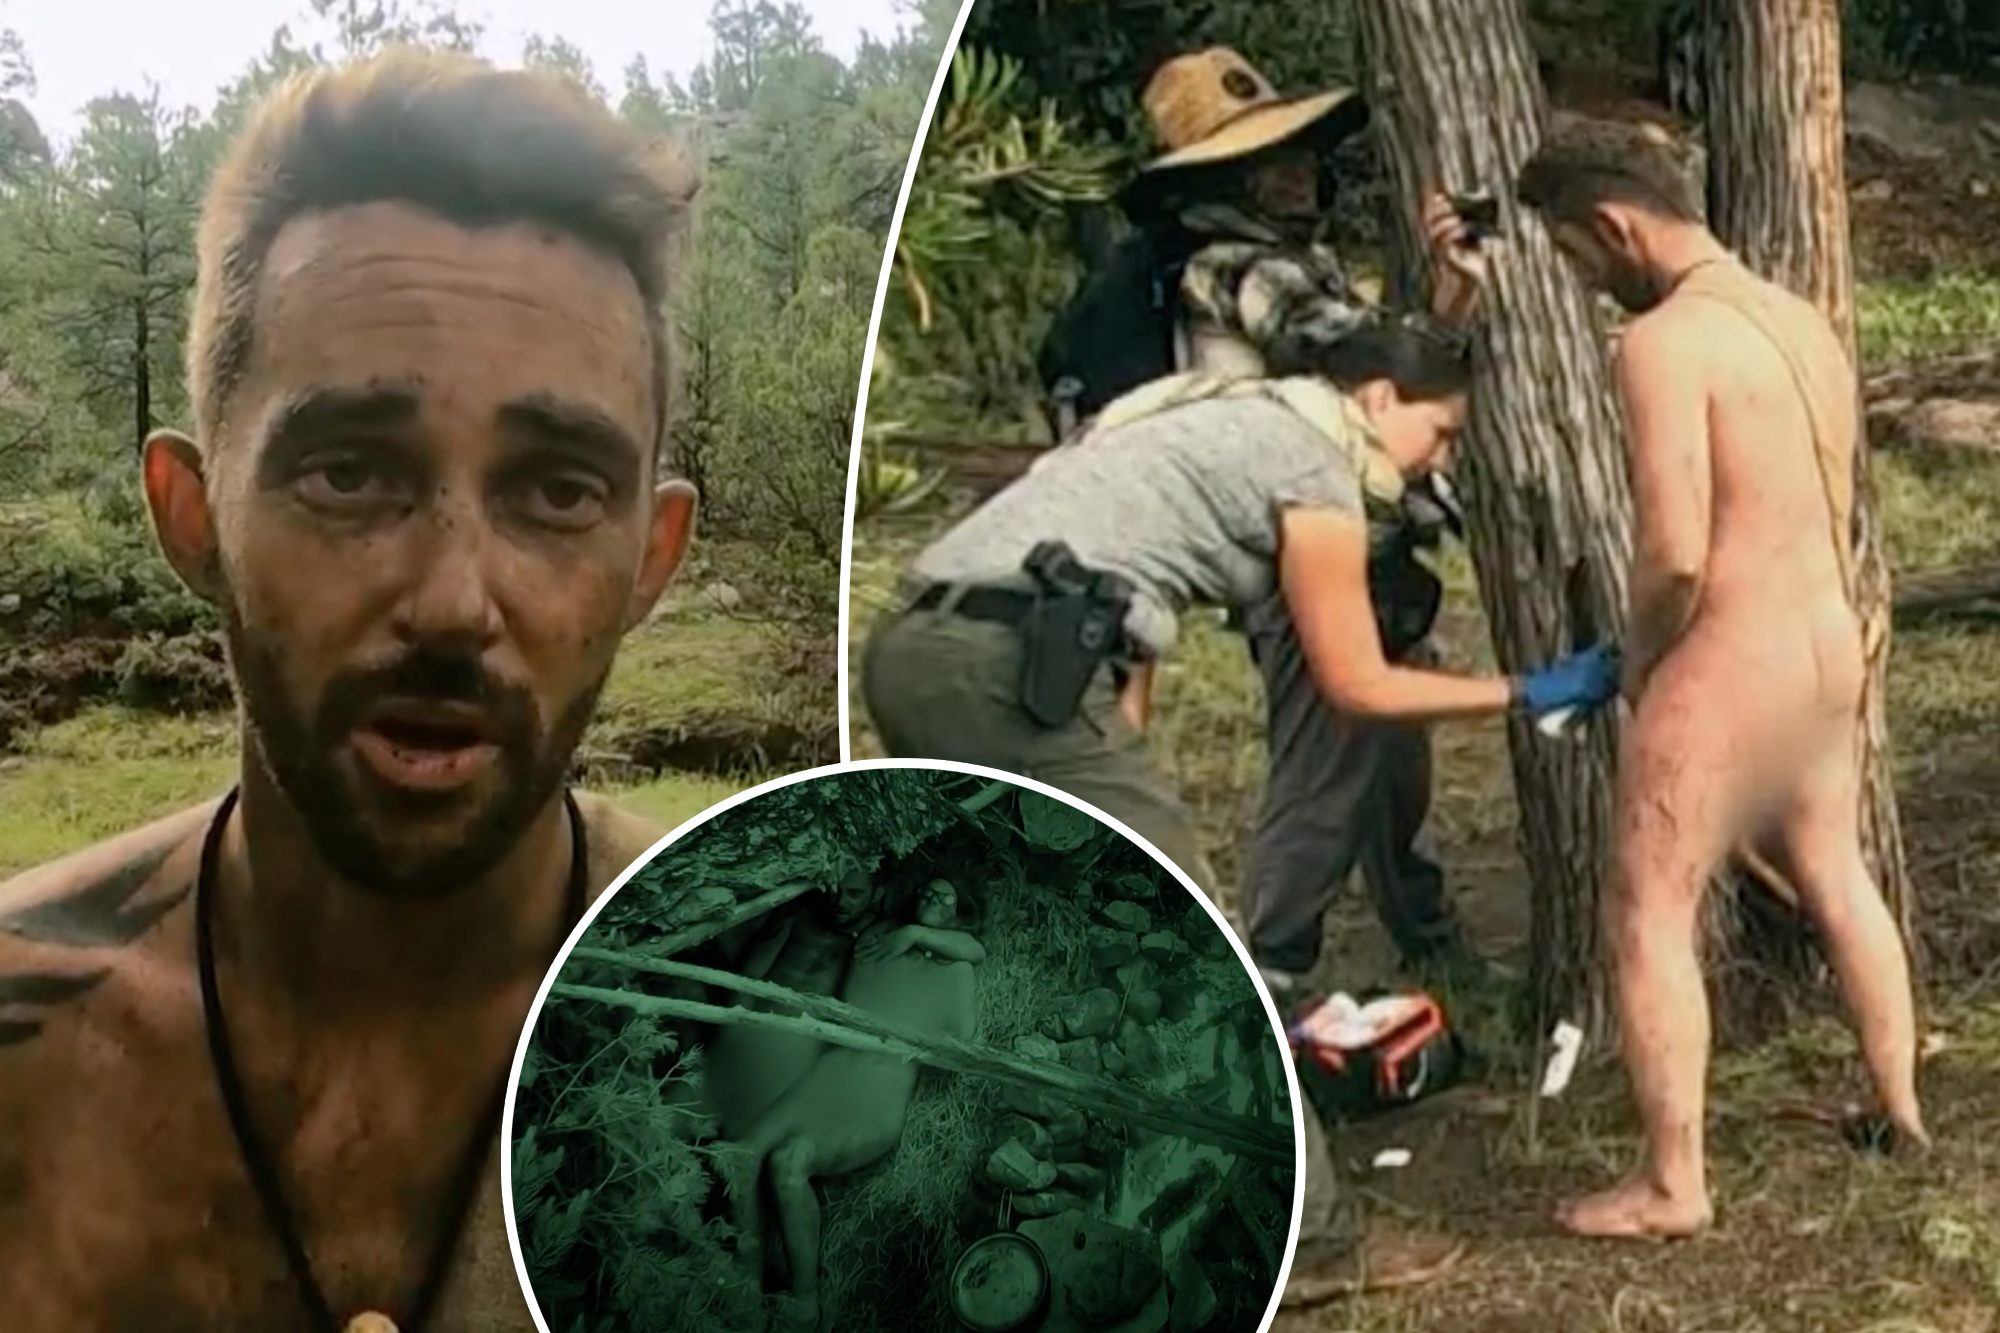 braden bolin add naked and afraid uncensered photo